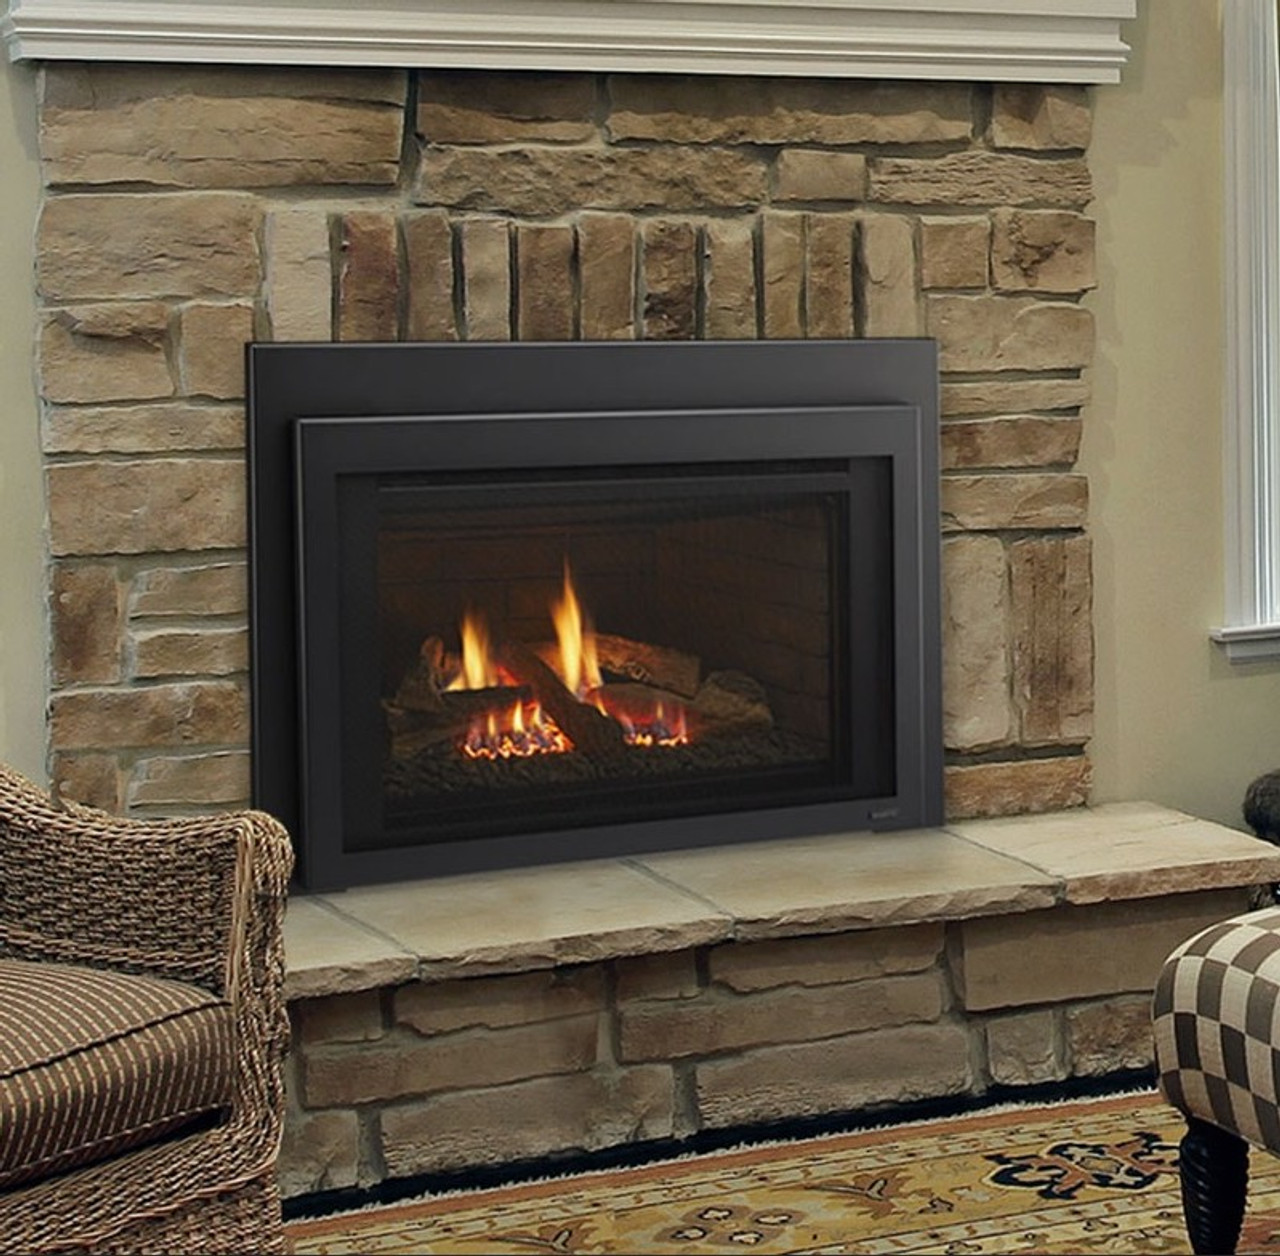 3 Simple Techniques For Vented Gas Fireplace Inserts